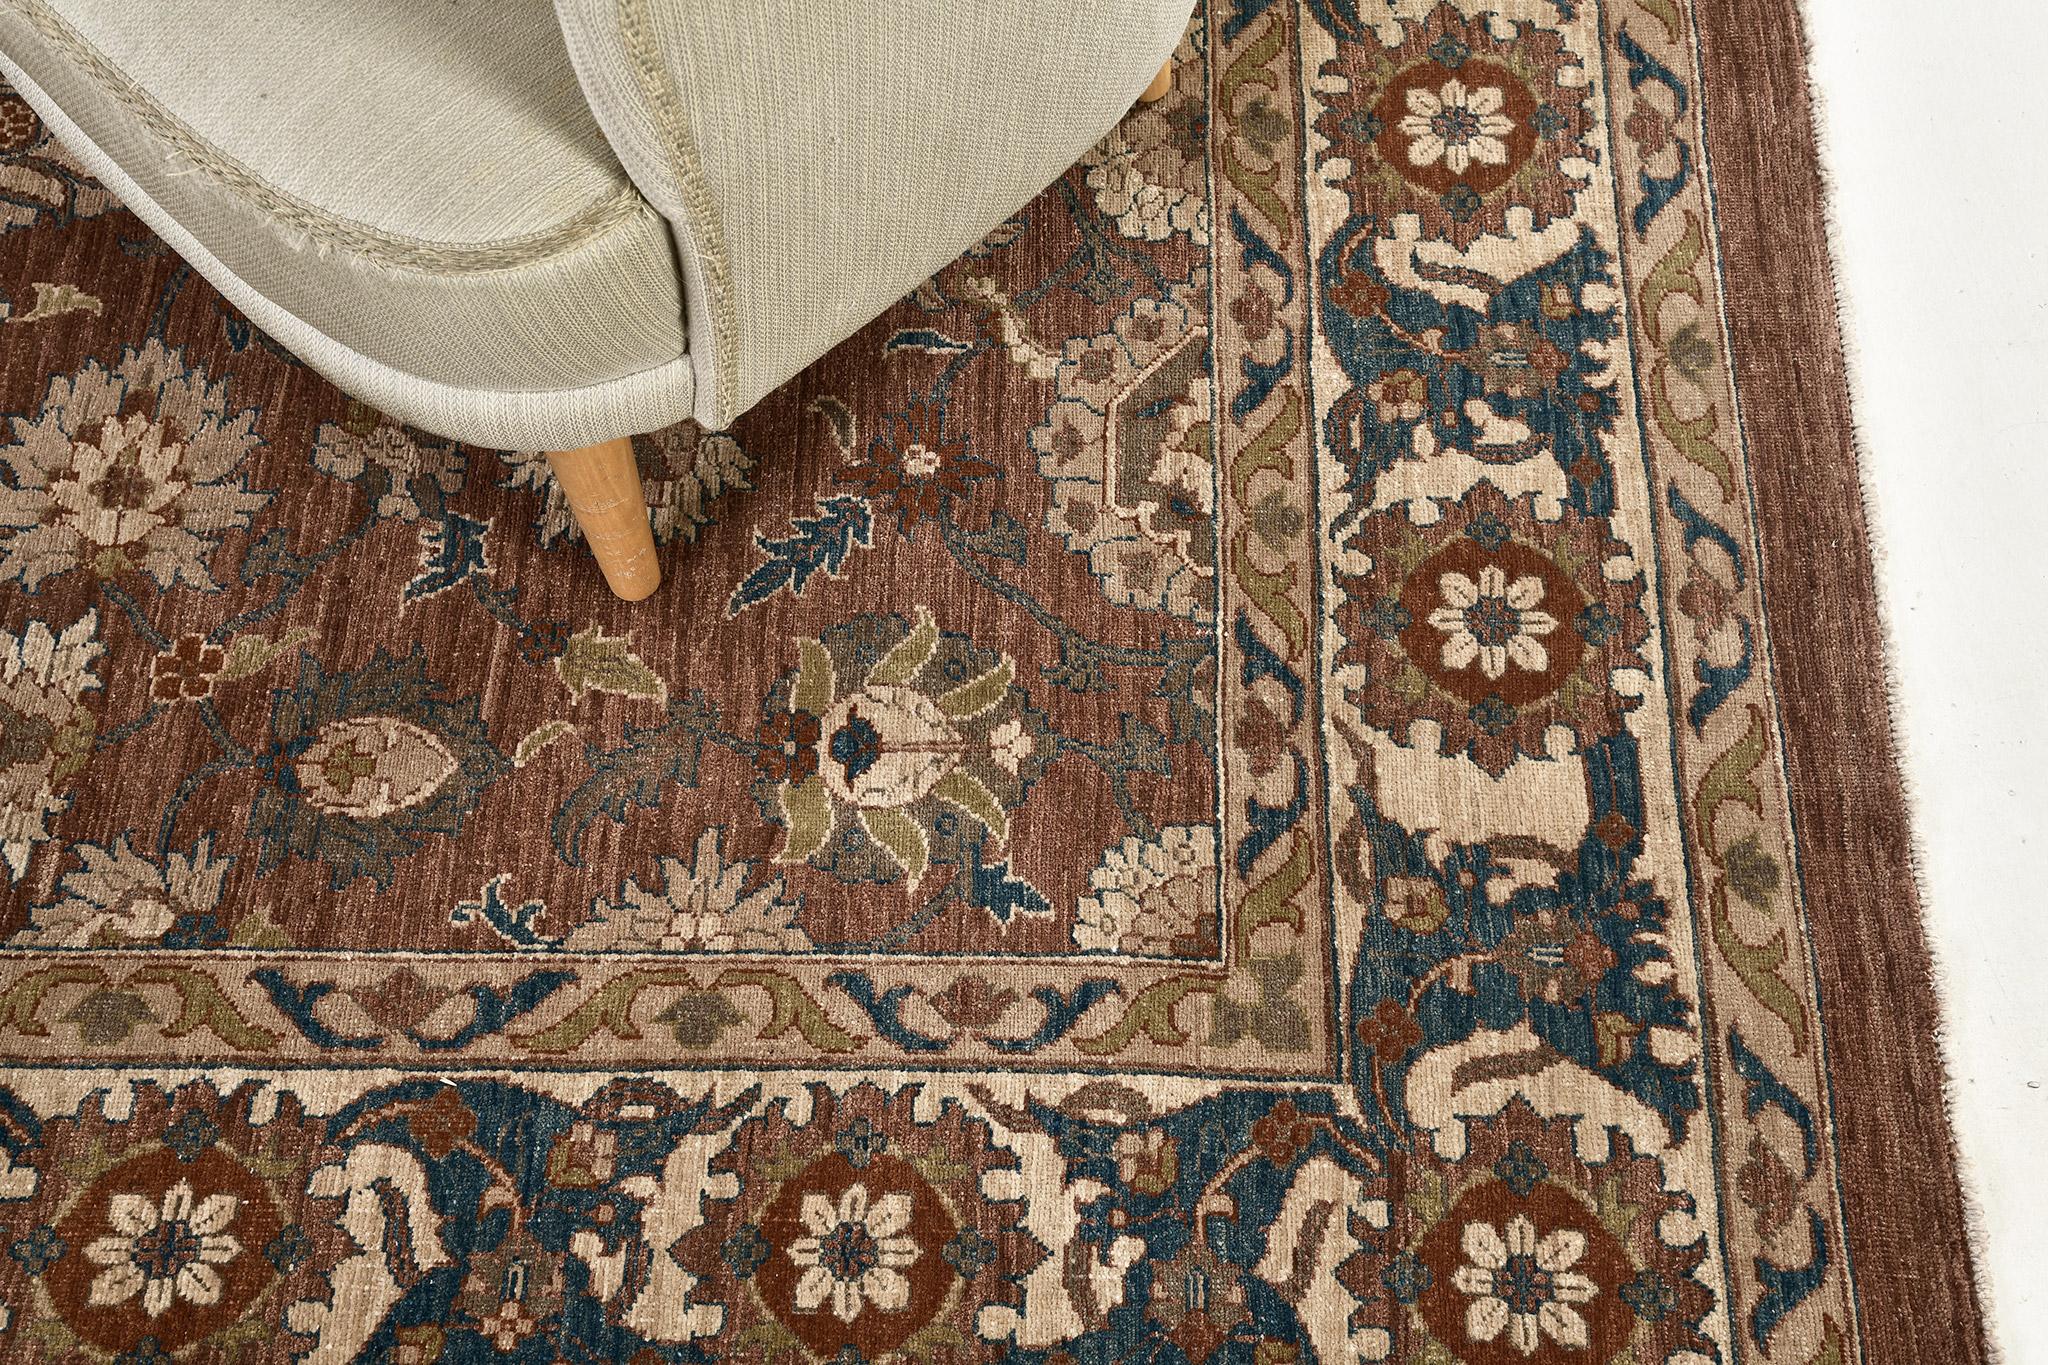 A sophisticated hand-spun wool Agra Rug revival that entices every designer to create a home space with elegance. The color balance of aegan blue, mahogany red and linen of this masterpiece complement with the symmetrical full bloom florid design